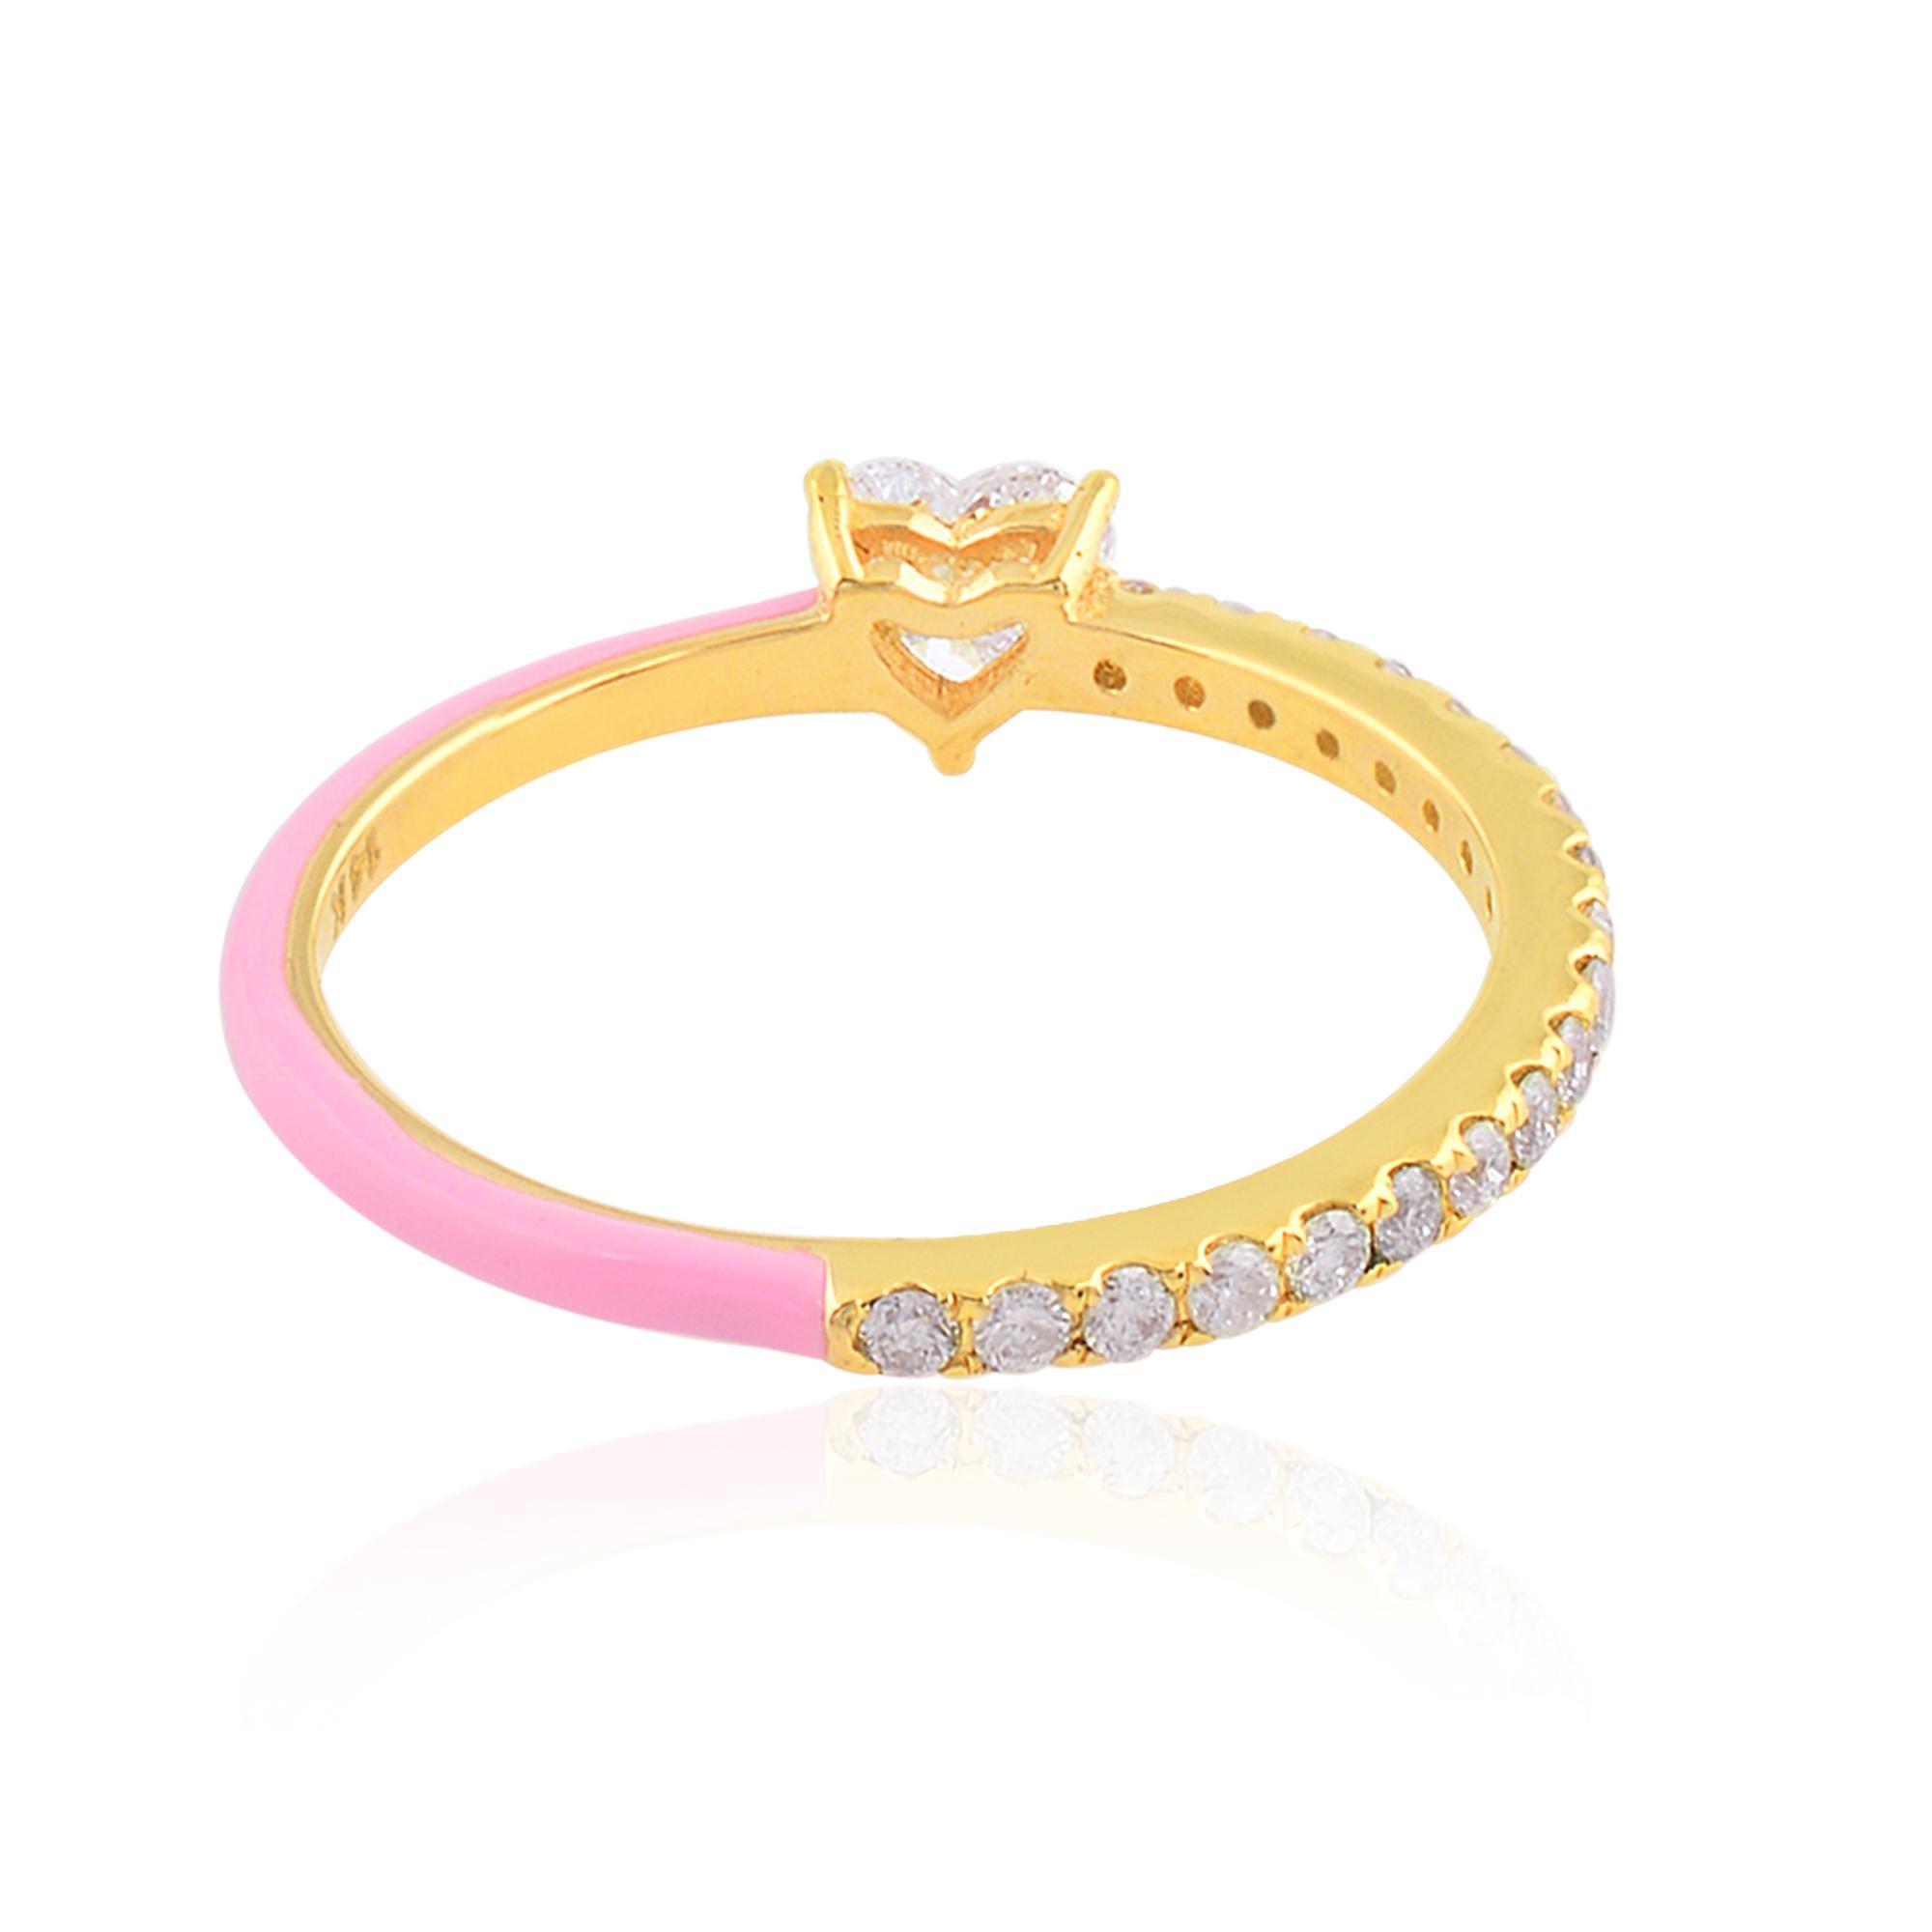 Item Code :- SFR-2031
Gross Weight :- 1.37 gm
14k Yellow Gold Weight :- 1.26 gm
Diamond Weight :- 0.55 carat  ( AVERAGE DIAMOND CLARITY SI1-SI2 & COLOR H-I )
Ring Size :- 7 US & All ring size available

✦ Sizing
.....................
We can adjust